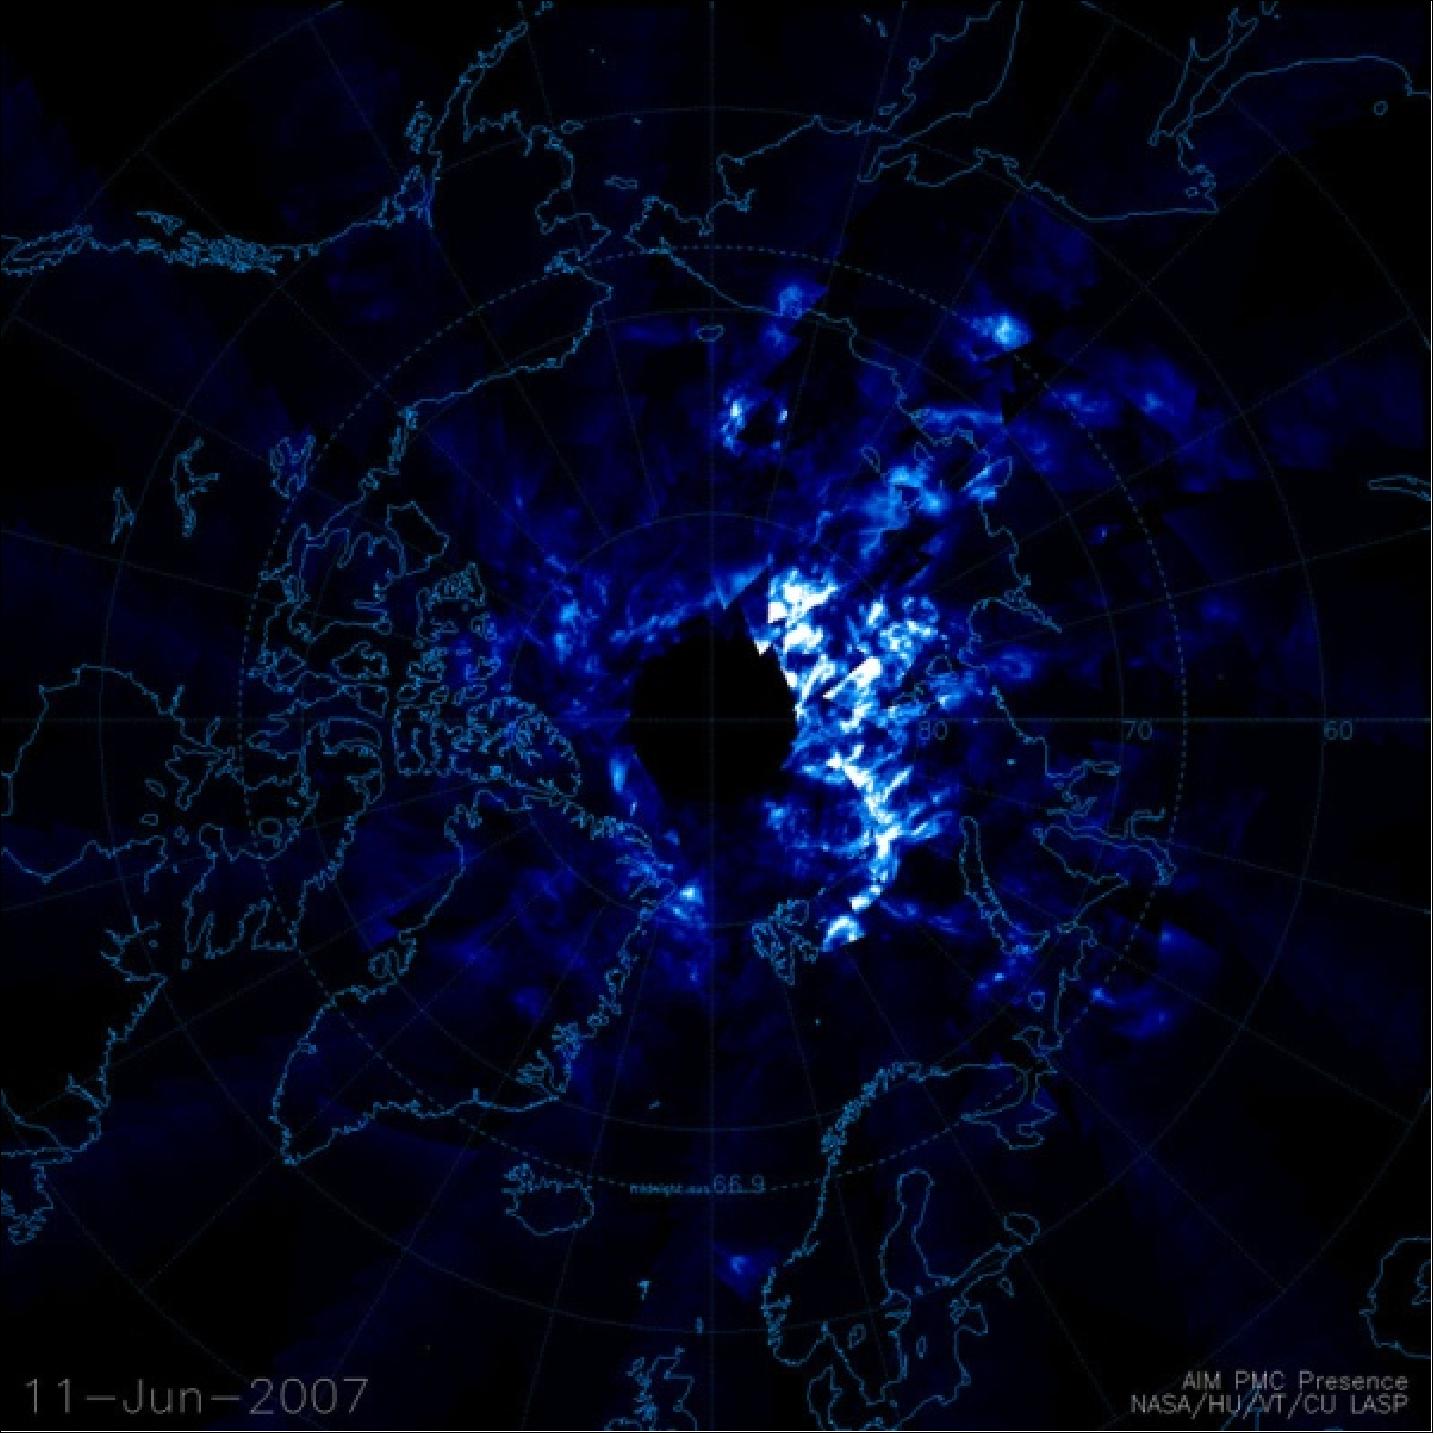 Figure 23: Noctilucent clouds over the Arctic region as seen by the AIM instruments (image credit: NASA)